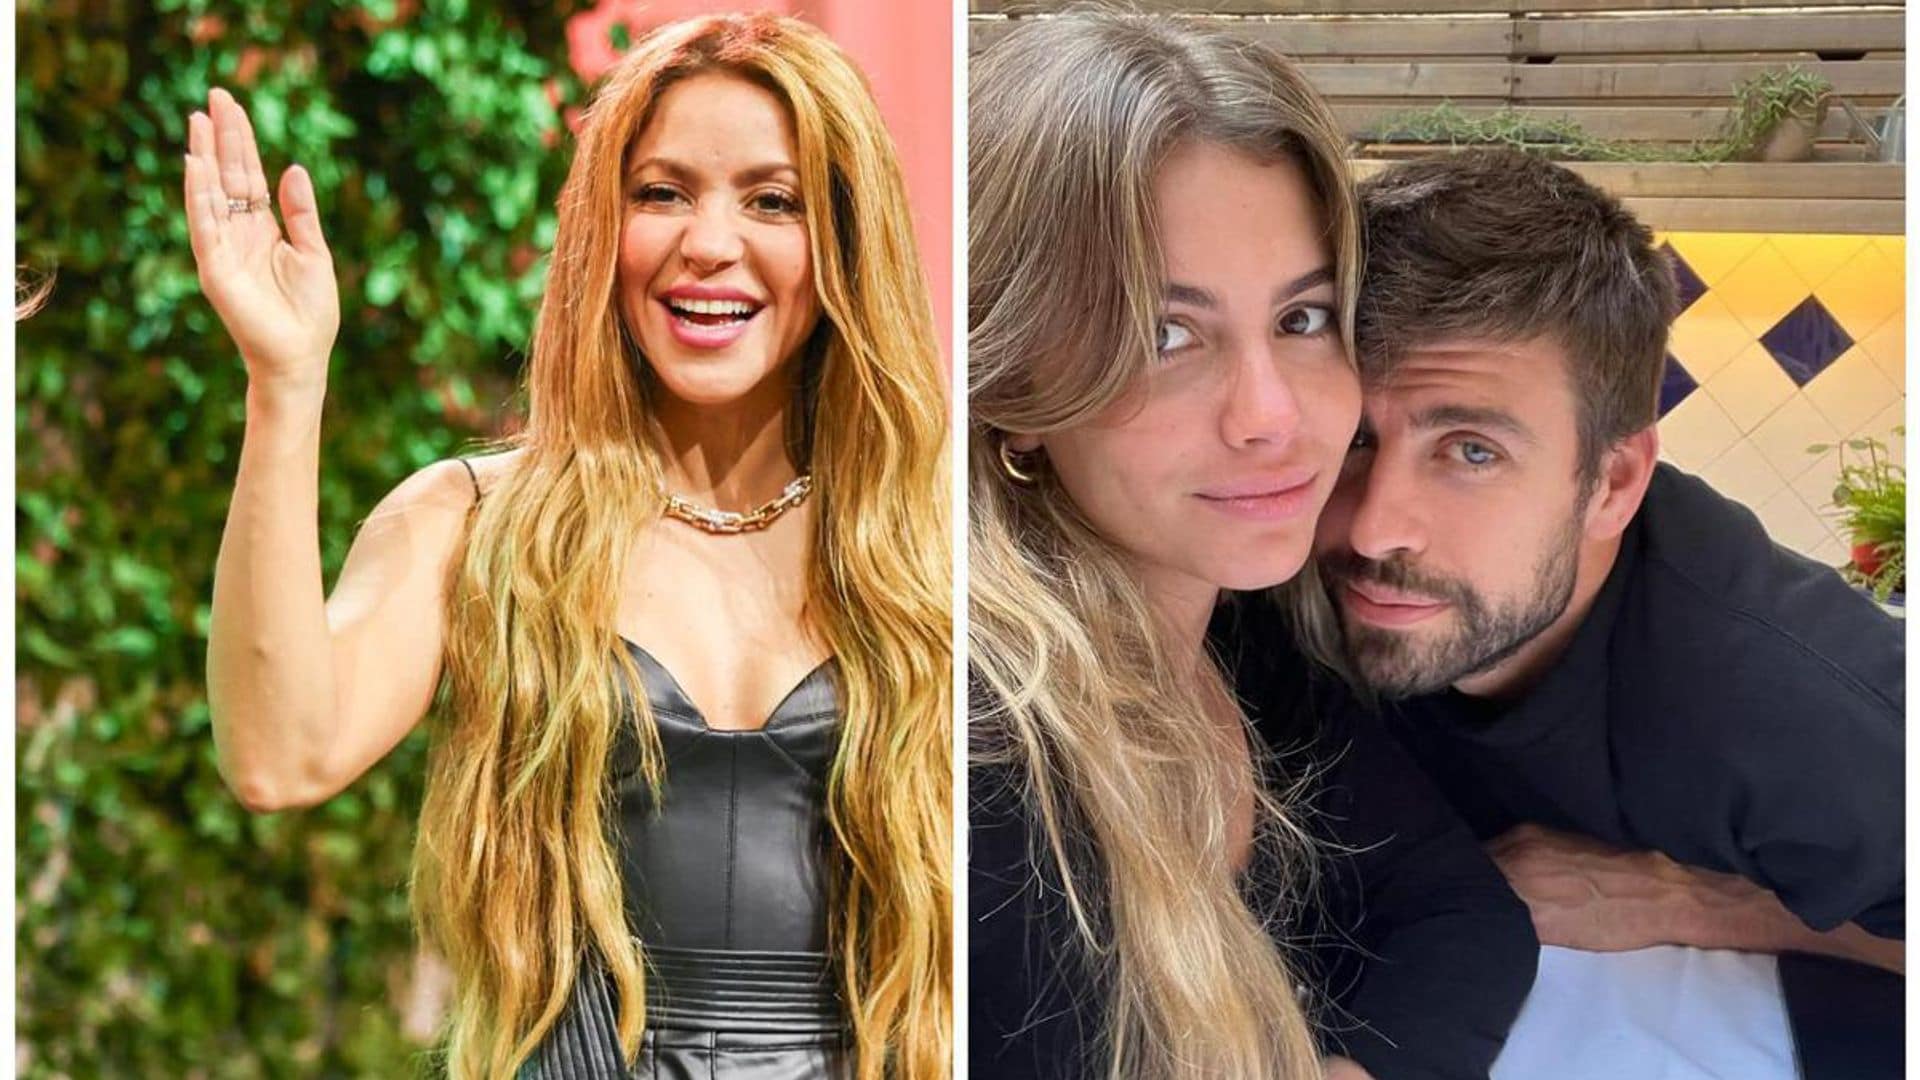 Did Shakira talk to Clara Chía? She wanted to tell ‘her side of the story’ after separating from Piqué